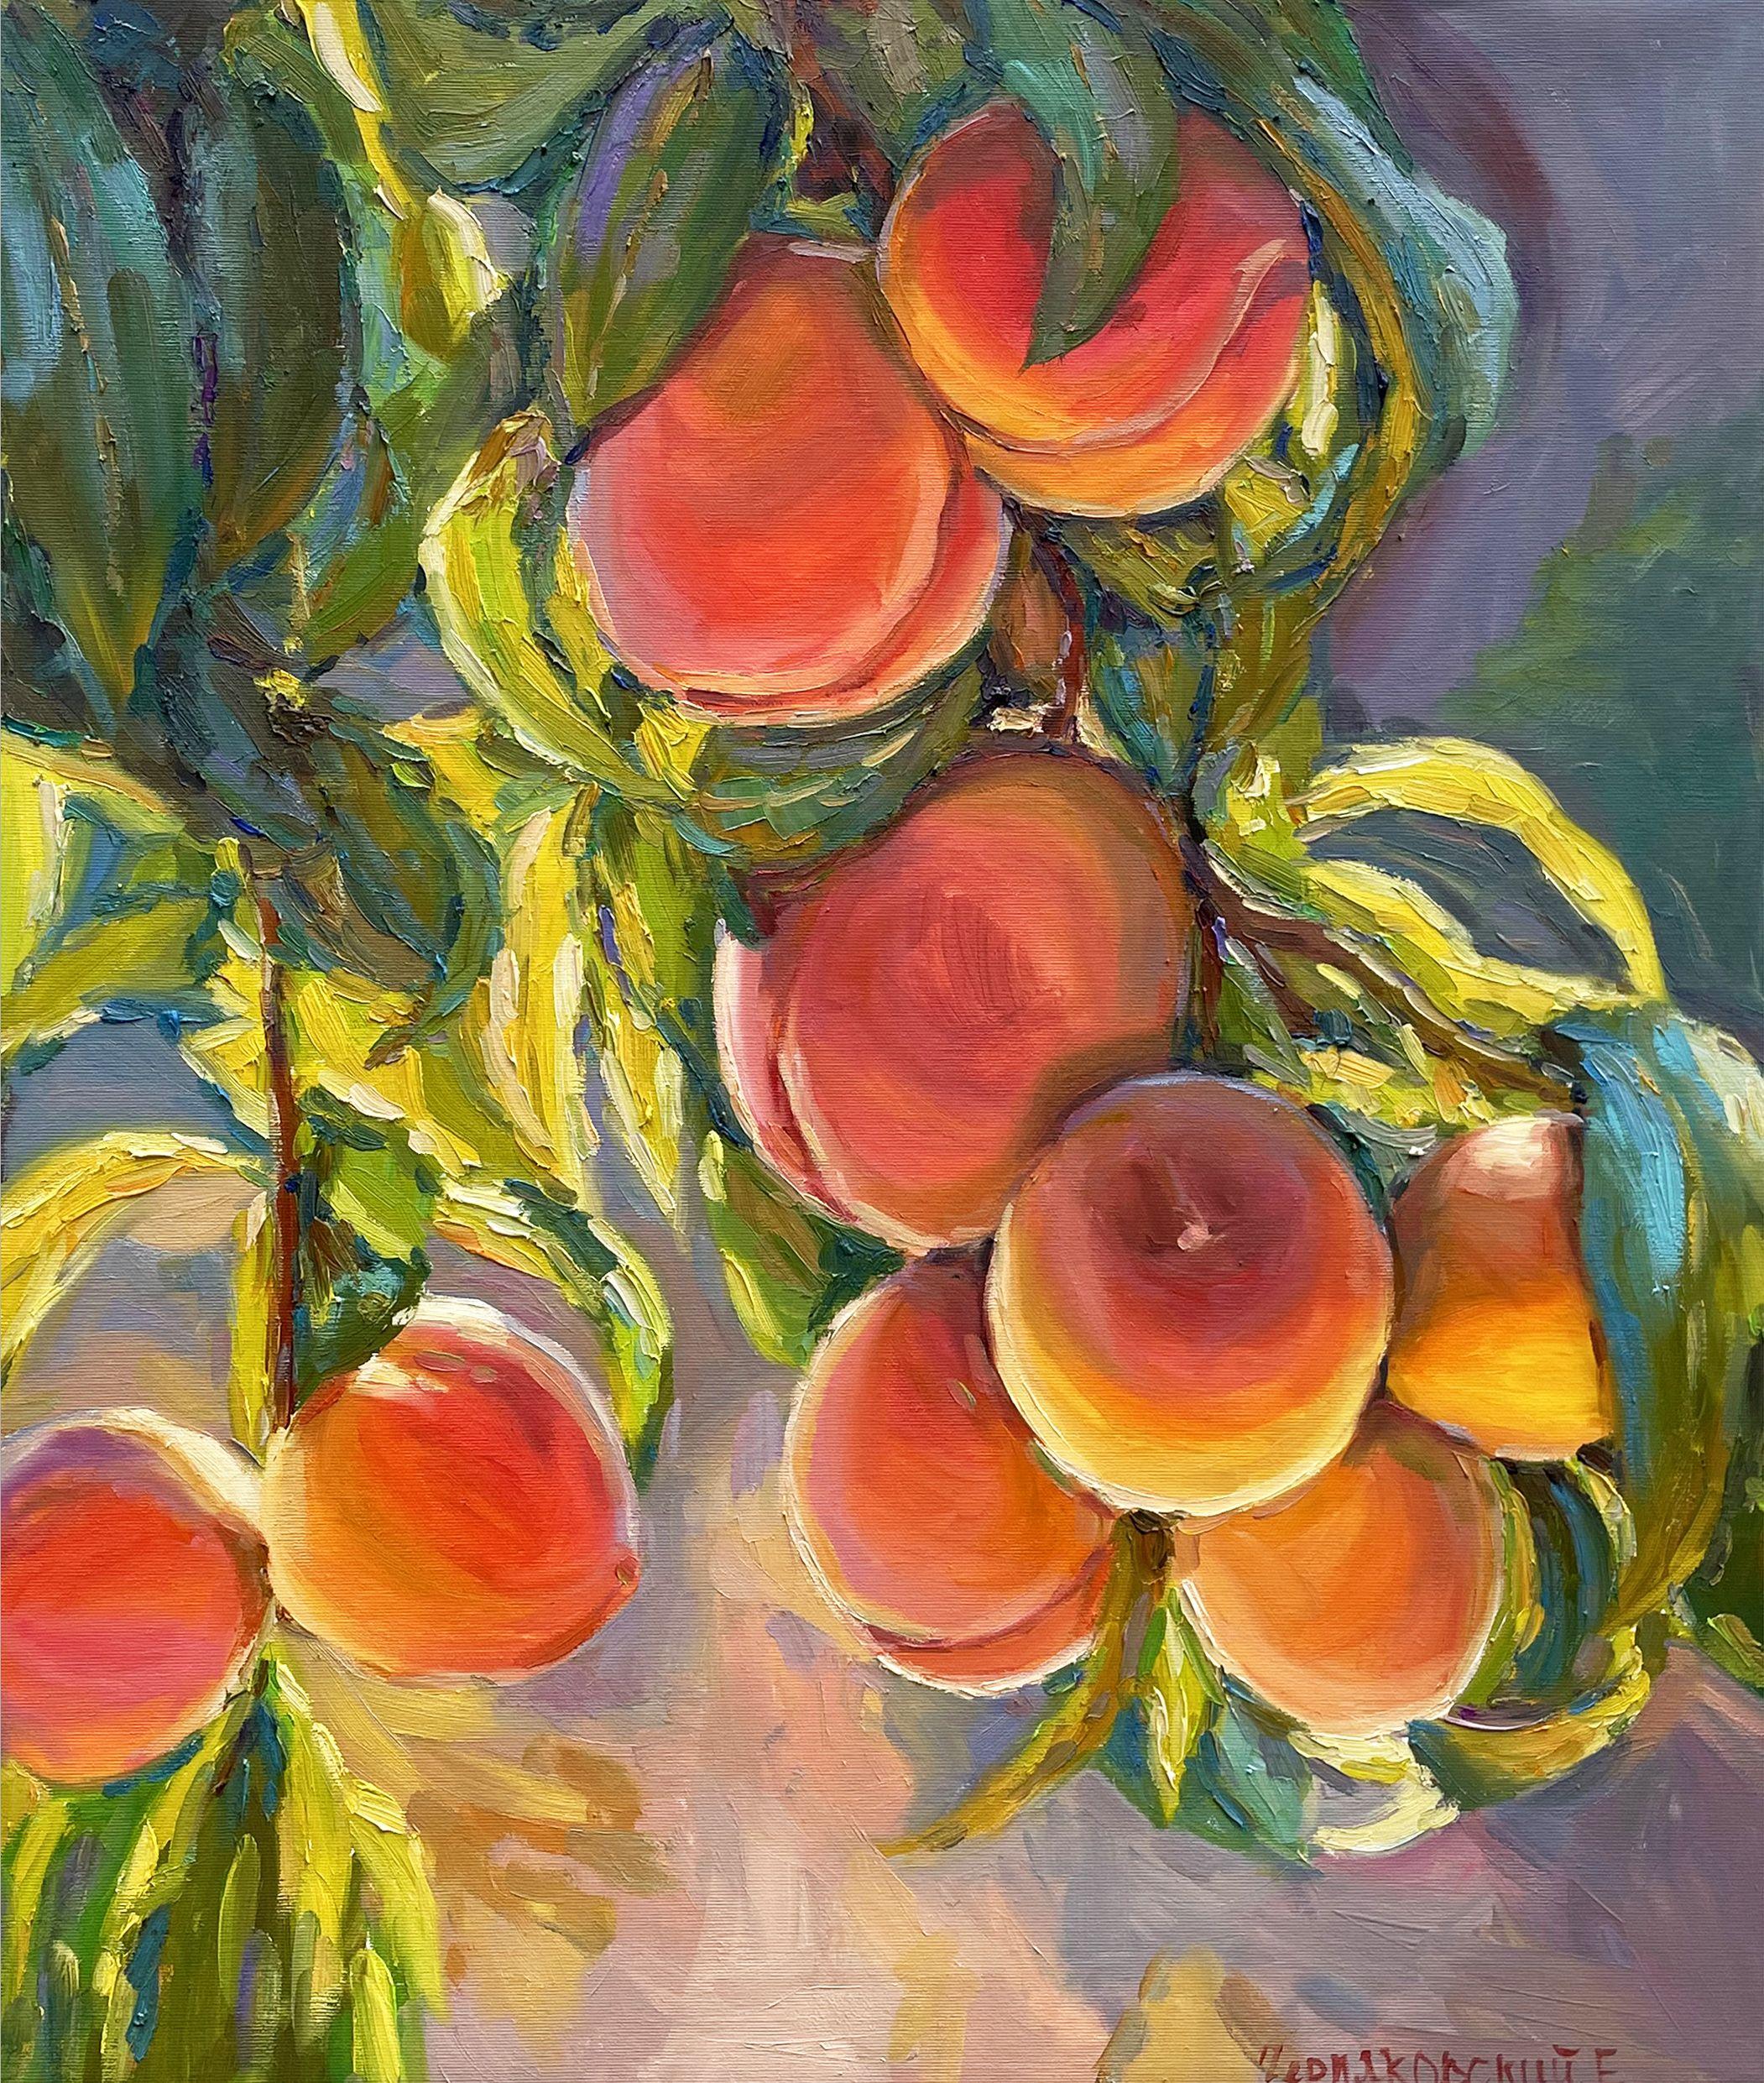 Original Oil painting by Ukrainian artist Evgeny Chernyakovsky      "Peaches"  70.0 X 60.0 CM / 27.5 X 23.6 IN  HIGH QUALITY oil on canvas  Signed on the front and back  Dated 2023  Good condition  GUARANTEE OF AUTHENTICITY   :: Painting ::